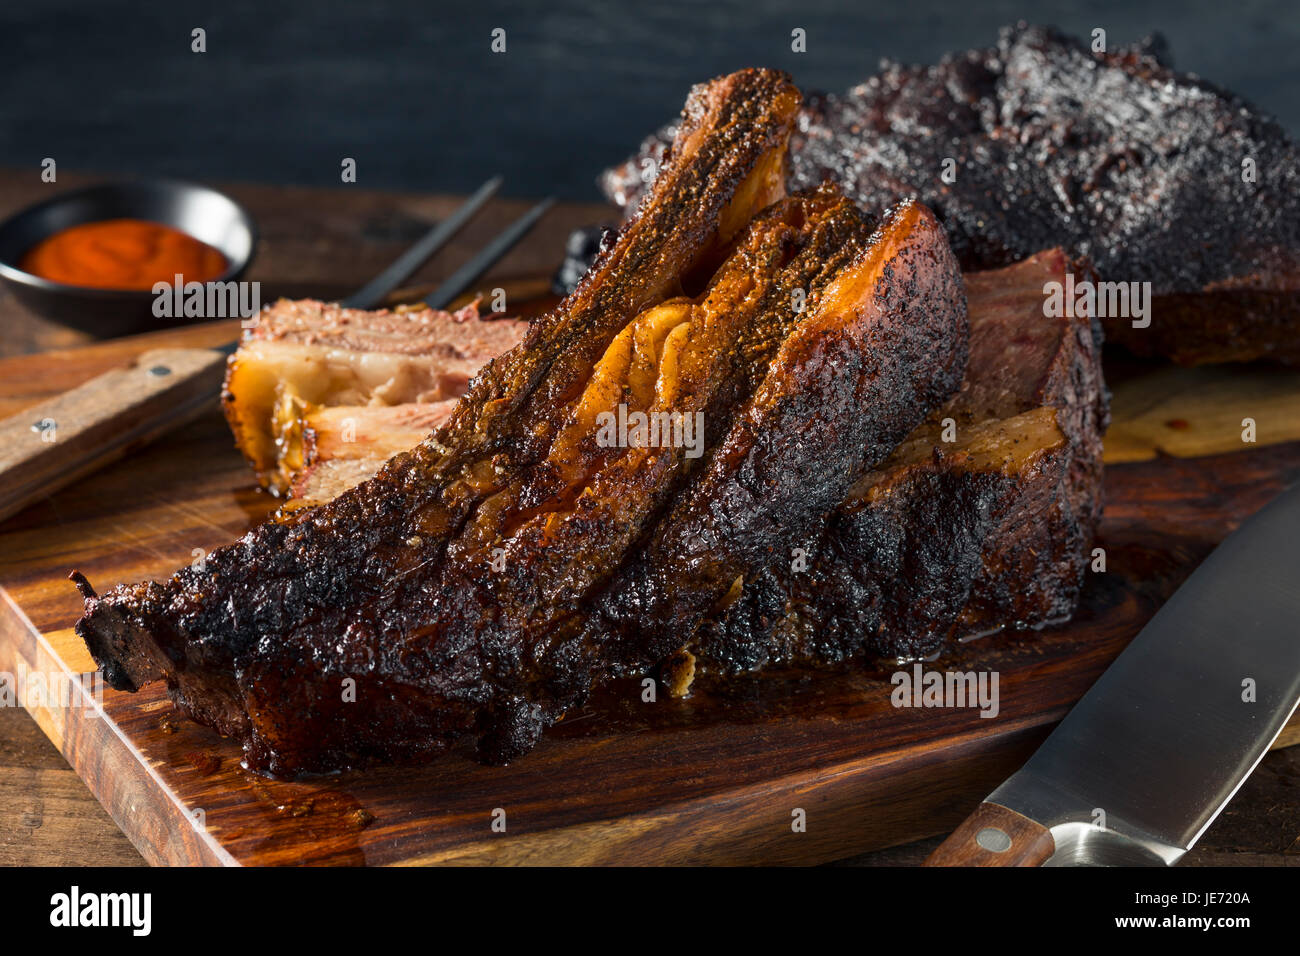 Delicious Smoked Beef Ribs with Barbecue Sauce Stock Photo